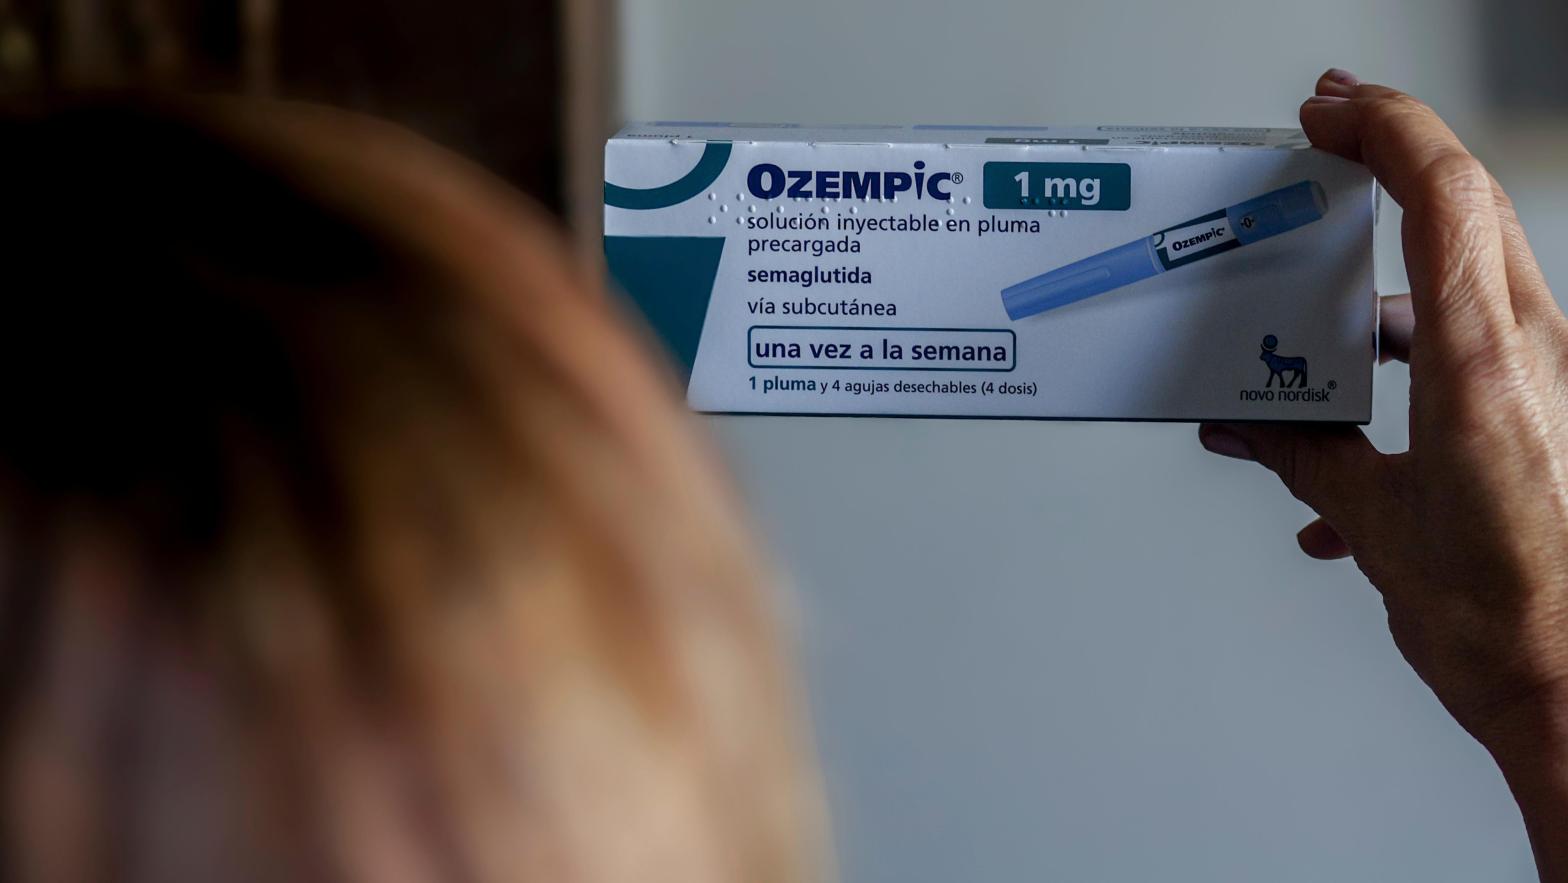 What to Know about the Link Between Stomach Paralysis and Ozempic